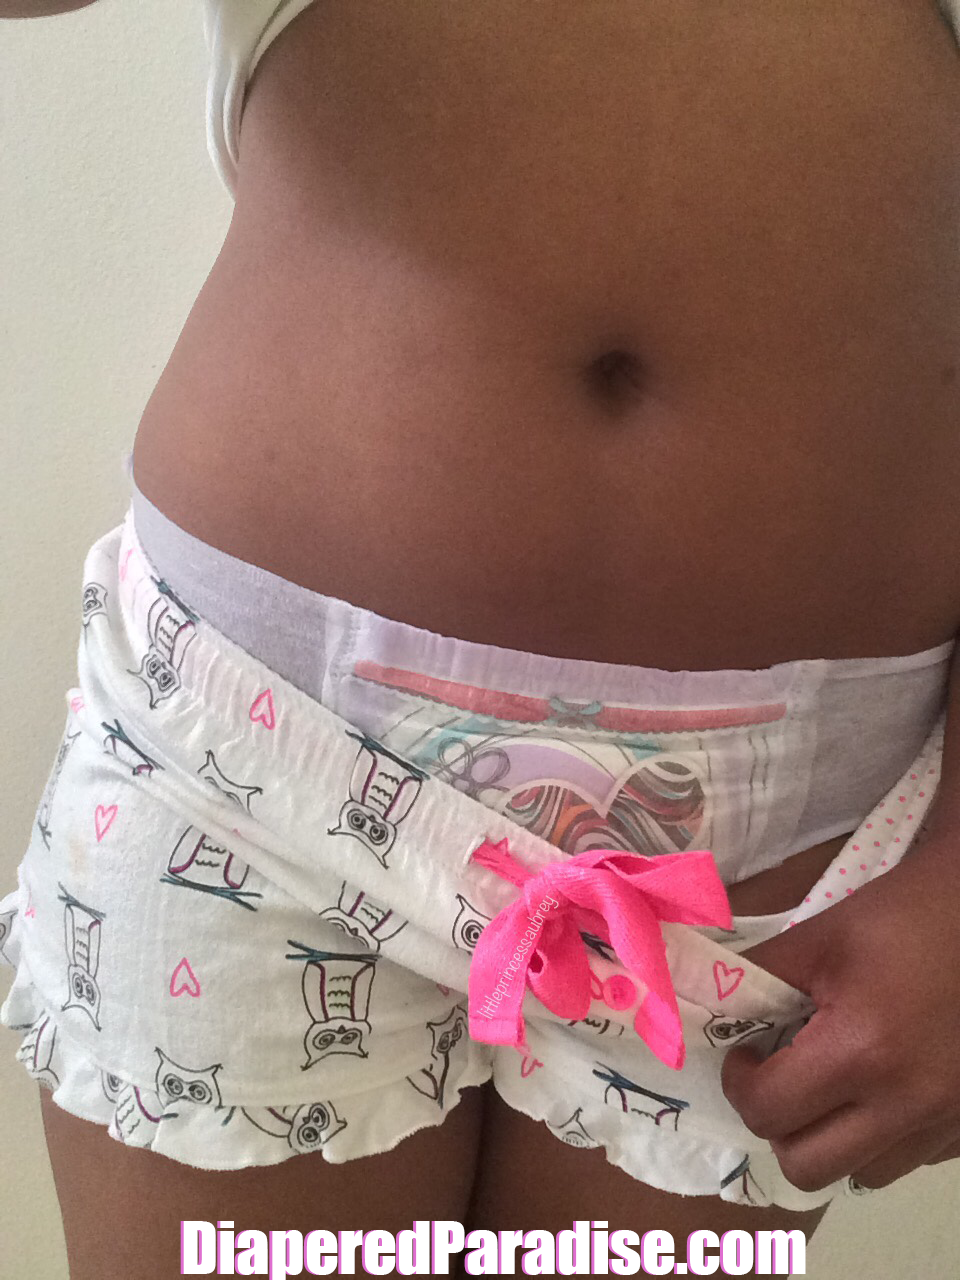 Bored and lost på Twitter: "@DiaperParadise @Diaperpics Love that sexy...